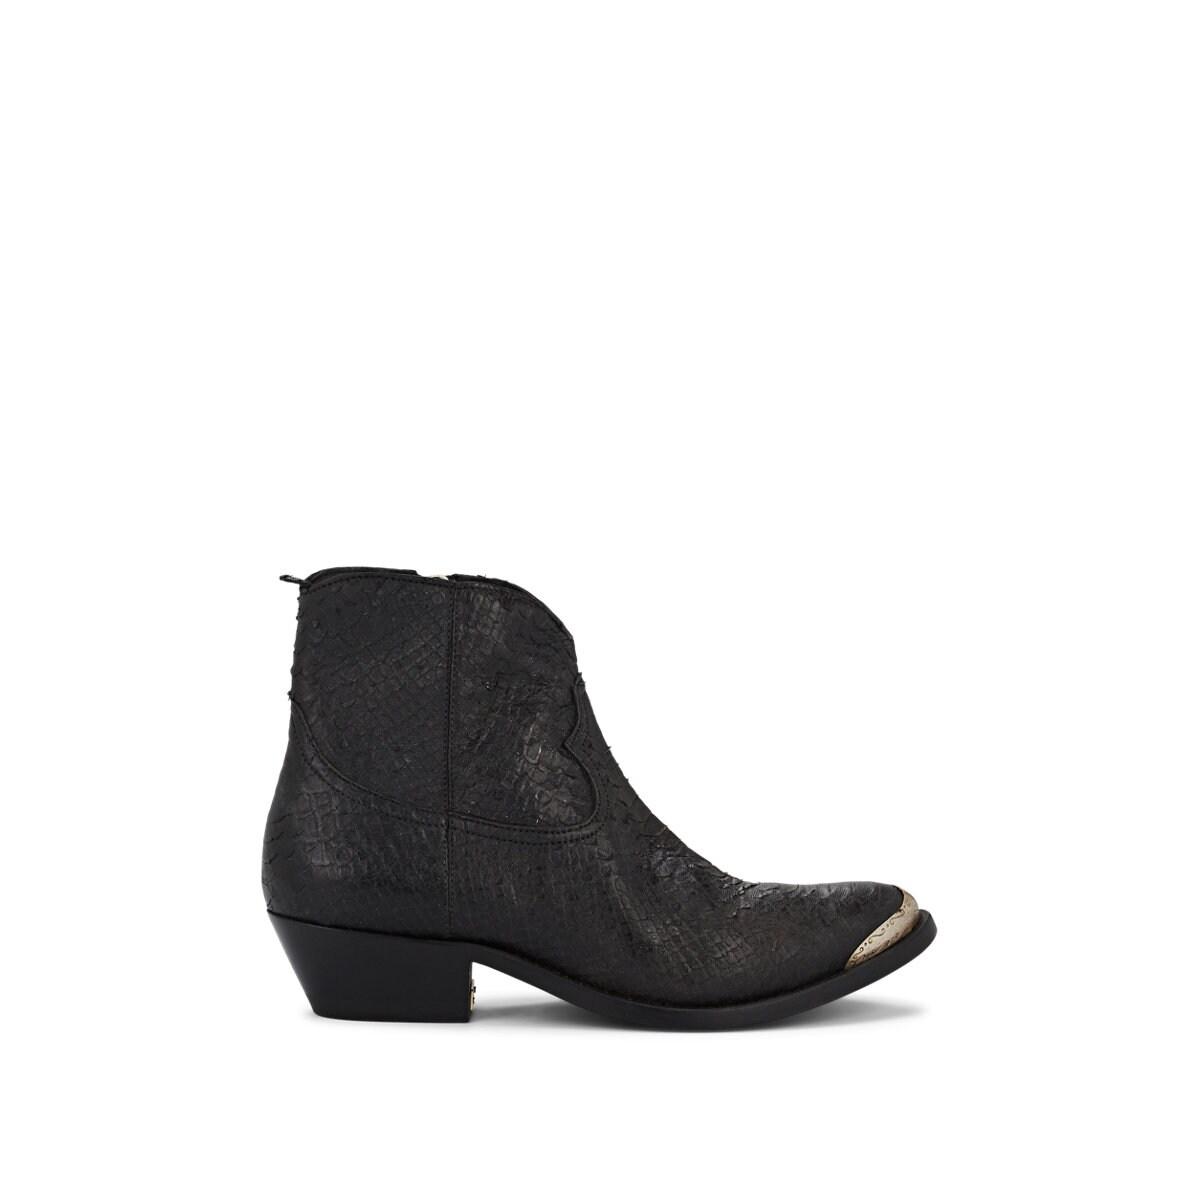 Golden Goose Deluxe Brand Goose Young Snakeskin Ankle Boots in Black - Lyst